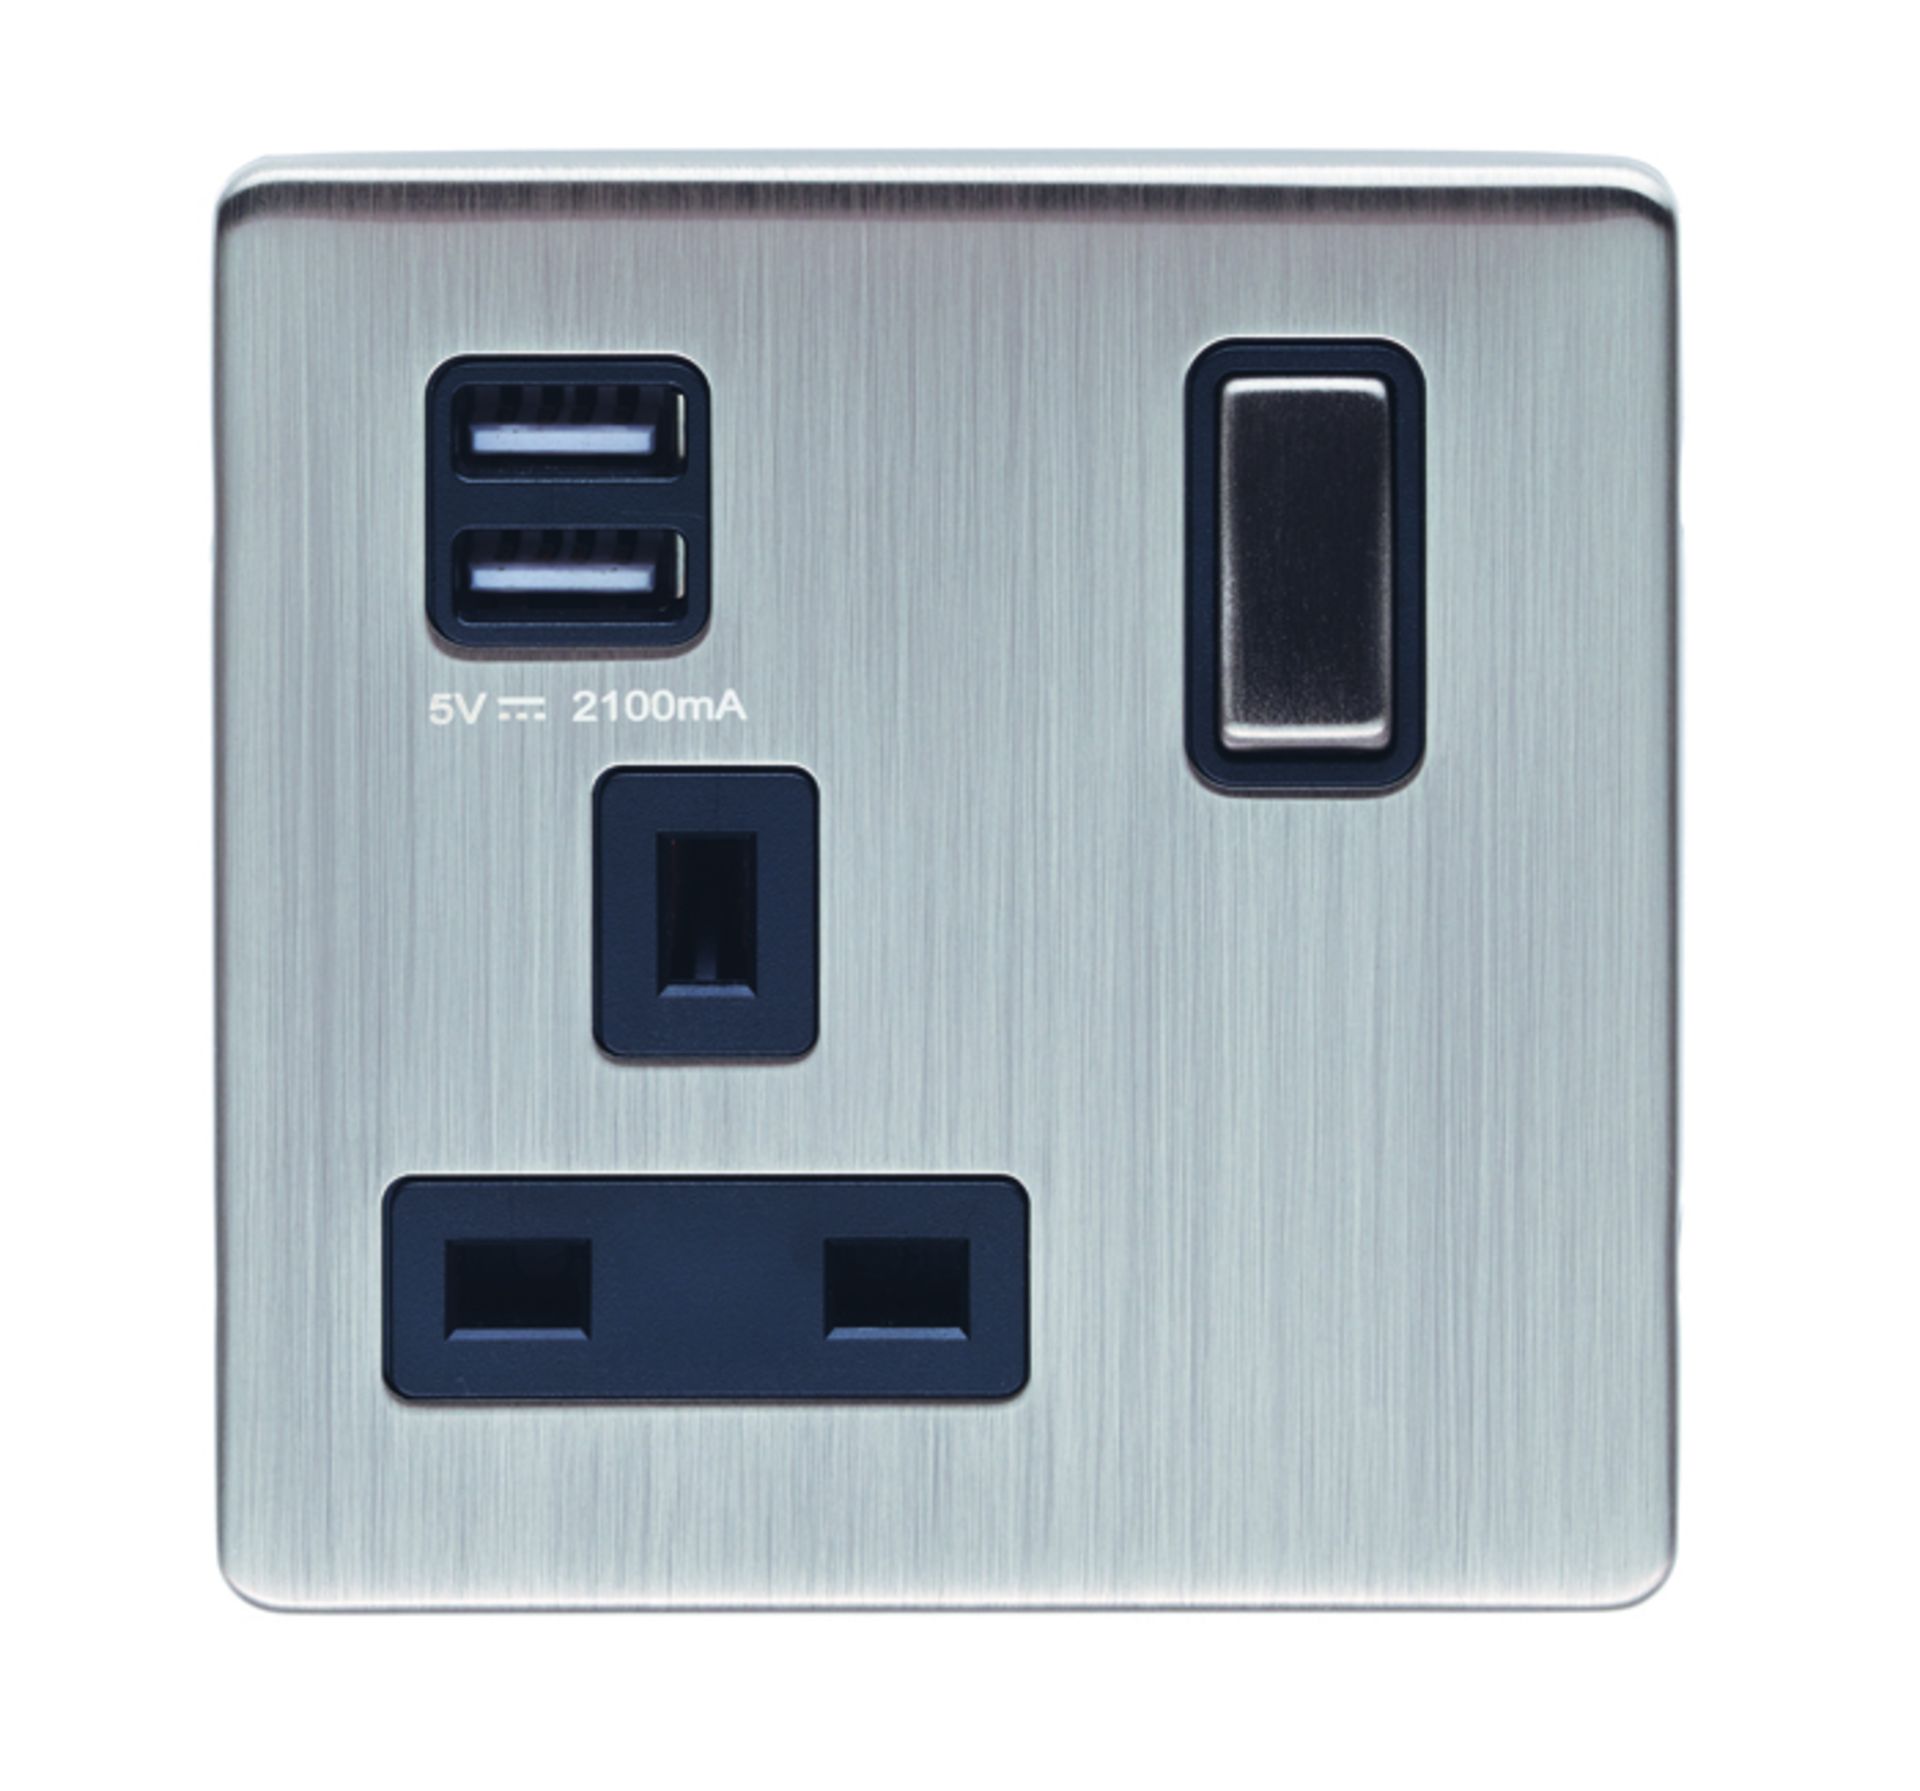 10 x Eurolite Concealed 6mm Satin Nickel Plate 1 gang 13amp switched sockets with twin 2.